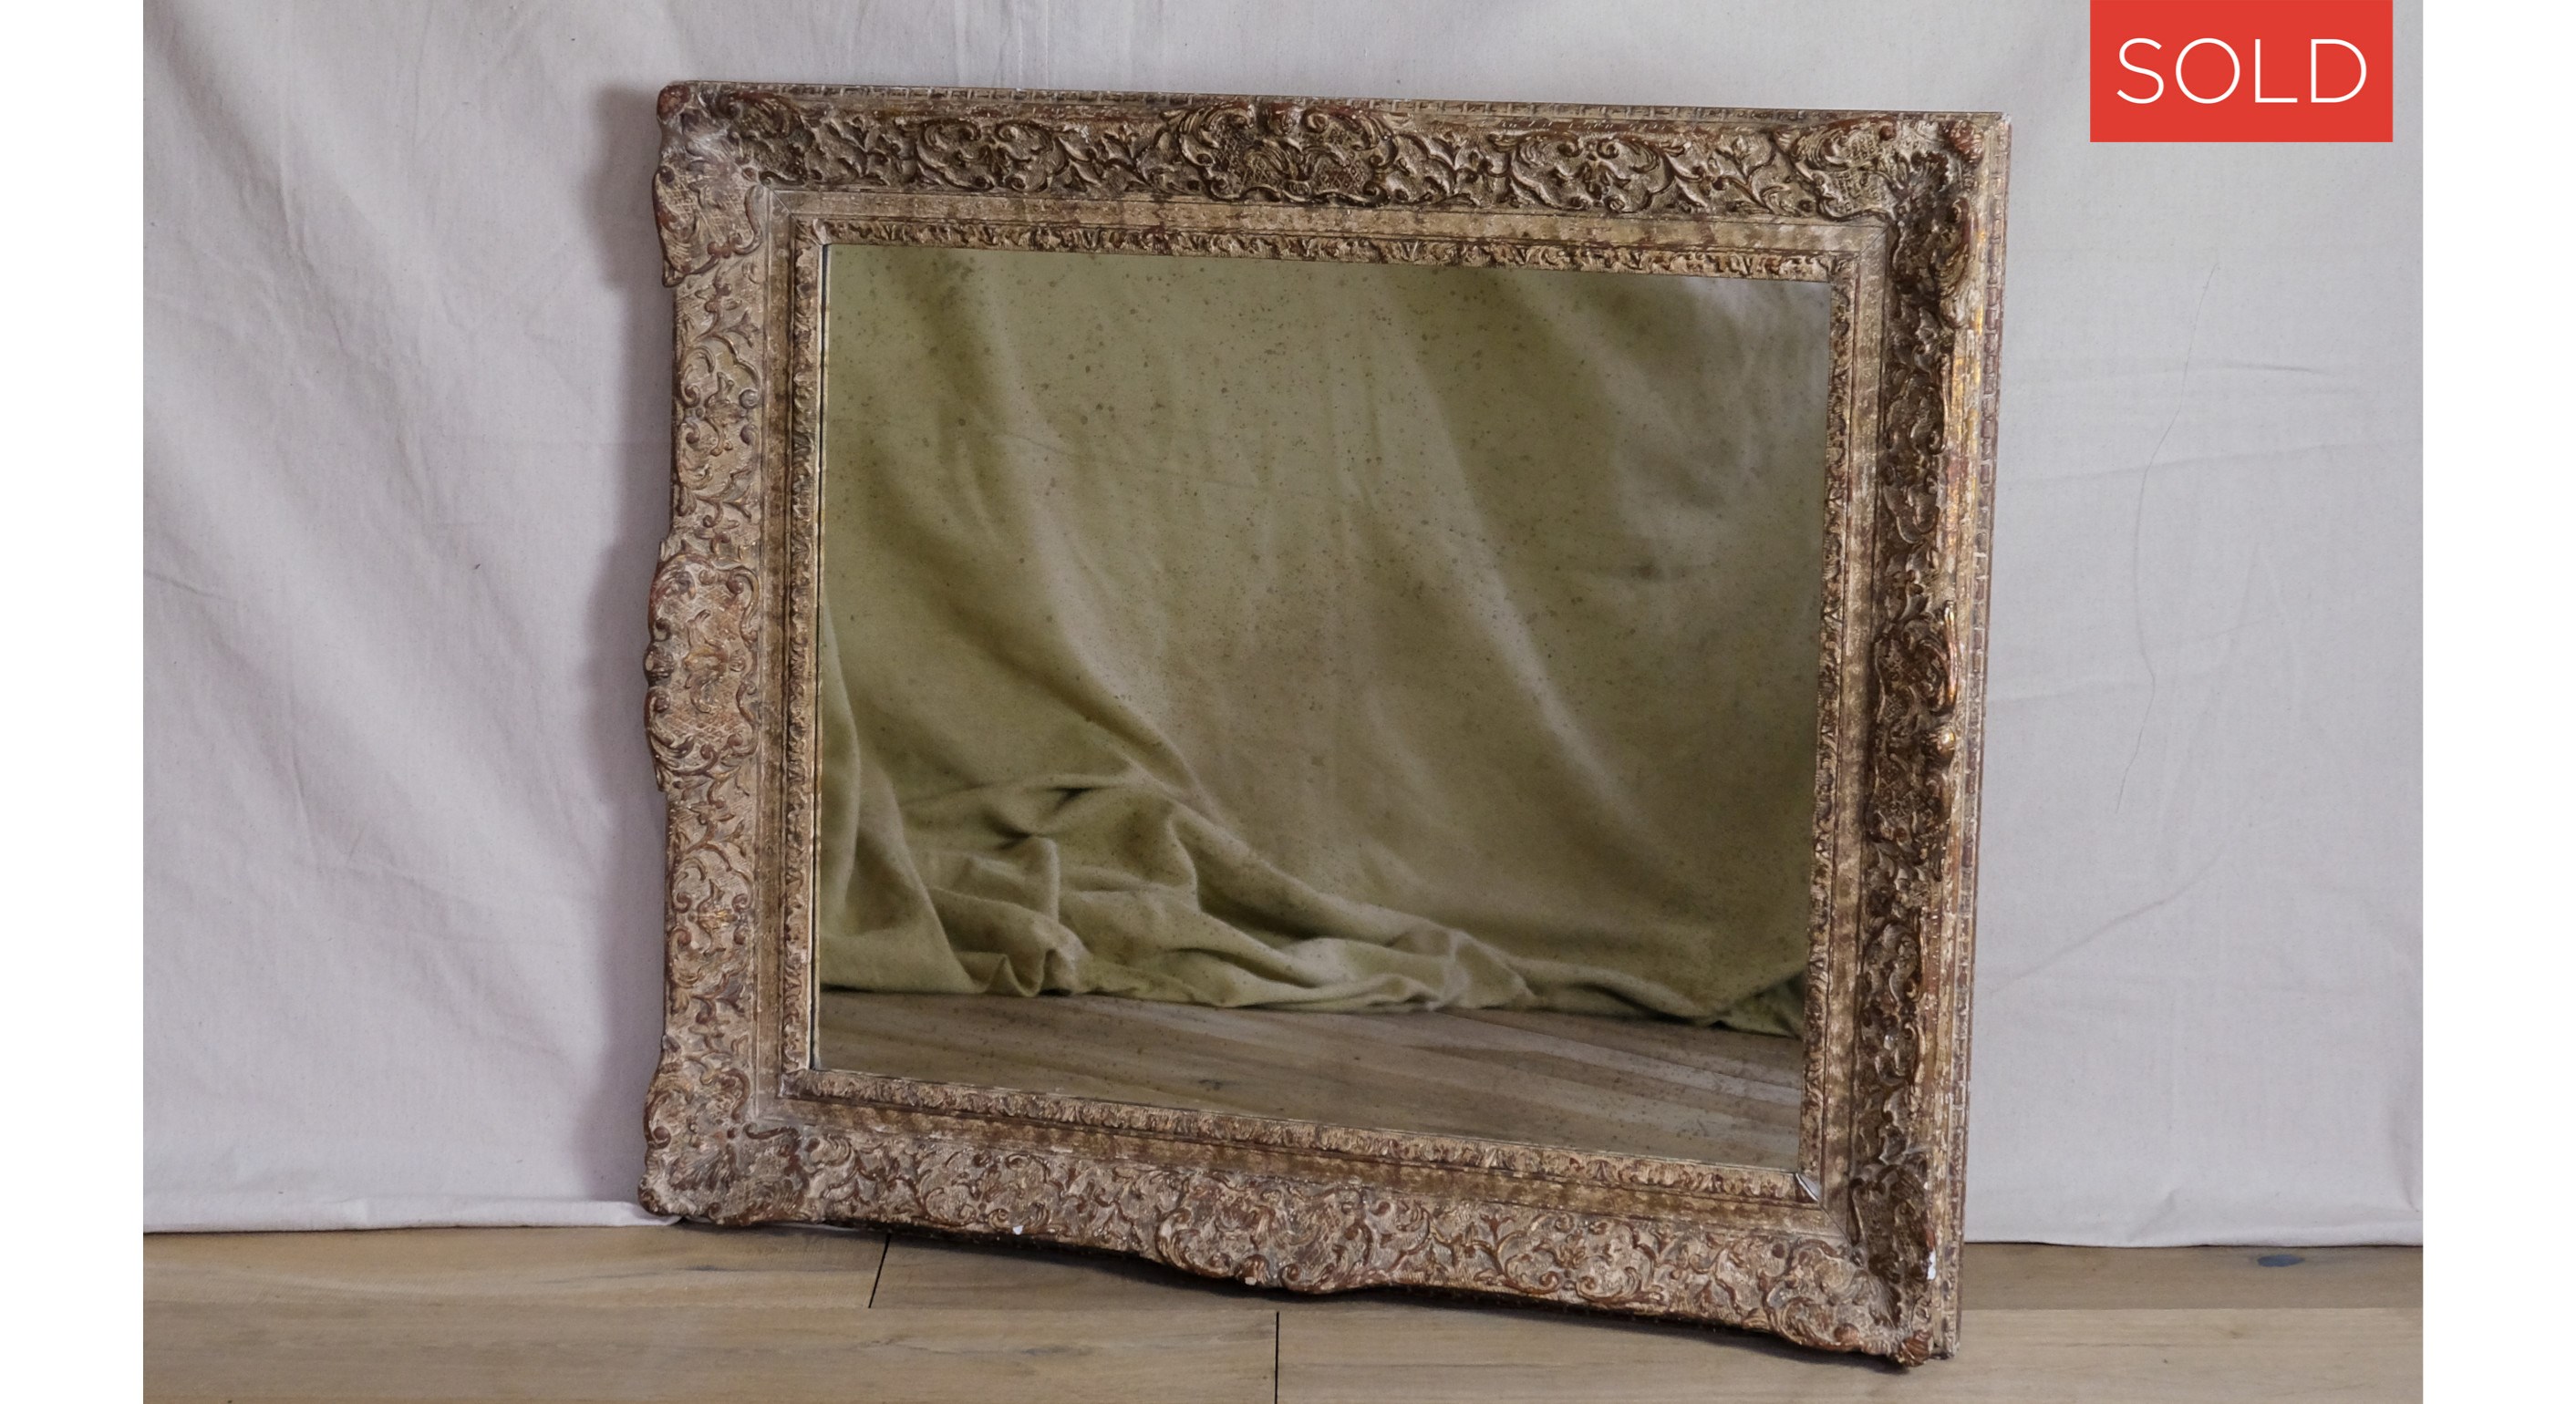 Antique French Mirror - SOLD